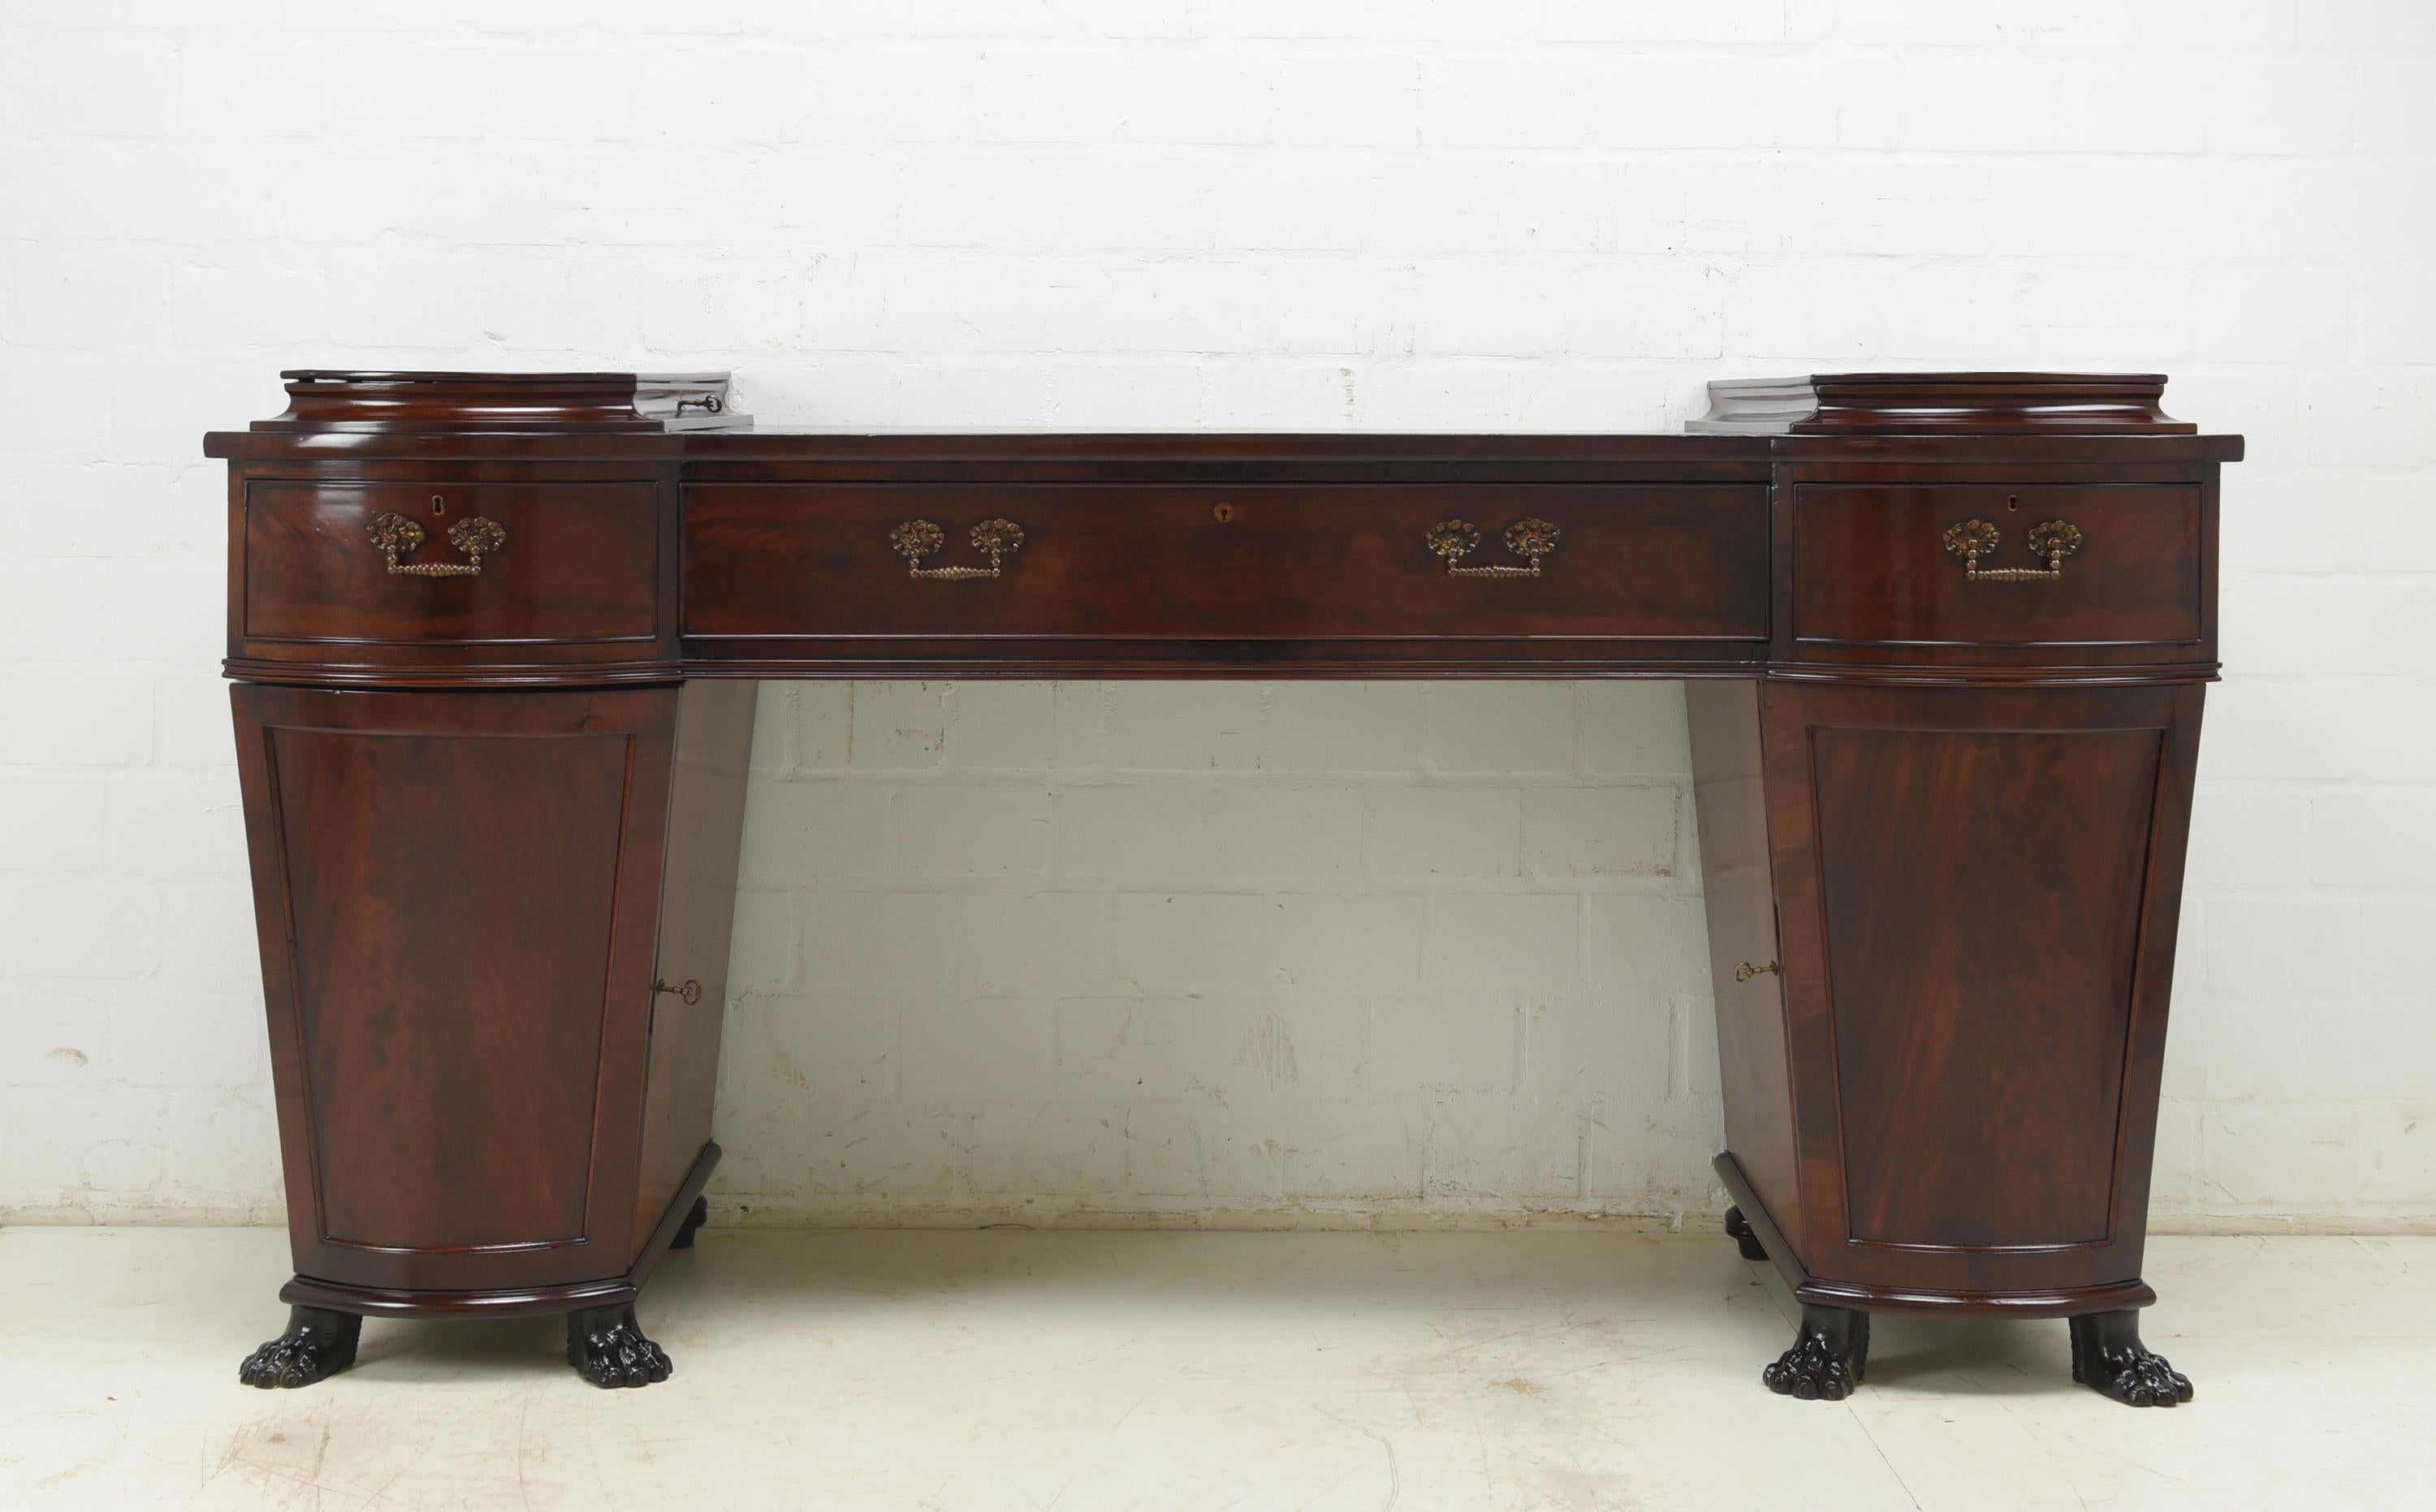 Pedestal sideboard restored England circa 1800 mahogany console

Features:
Two-door model with drawers, folding compartment, secret drawer and side secret door
Very high quality processing
Drawers pronged
Original fittings and locks
Original